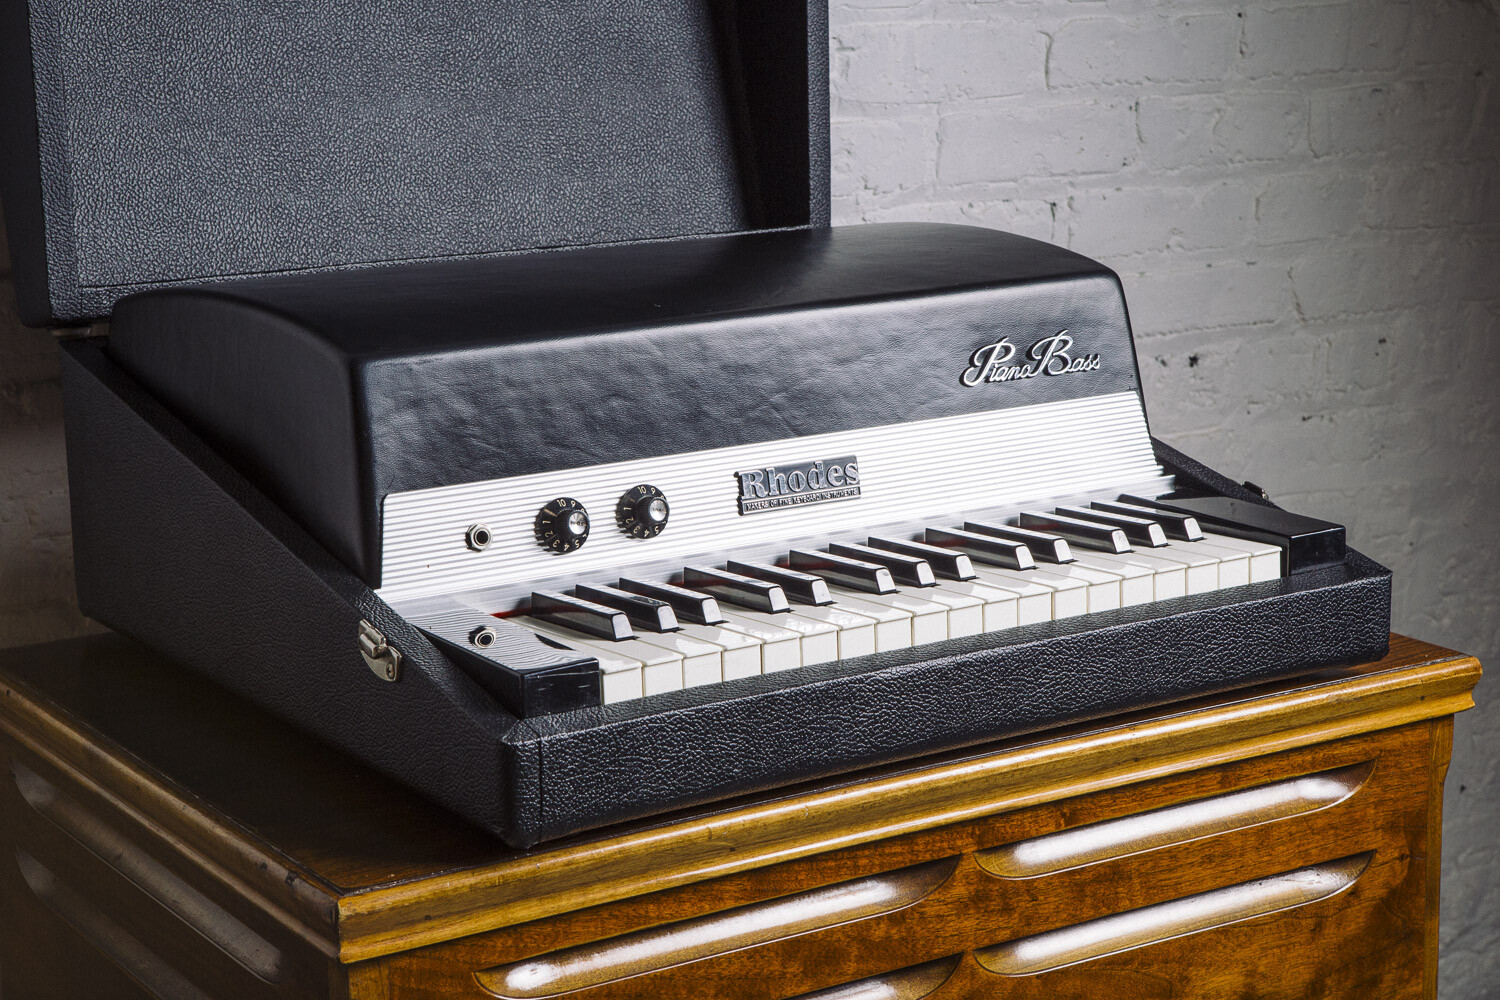 FOR SALE: Rhodes Piano Bass - The Chicago Electric Piano Co.